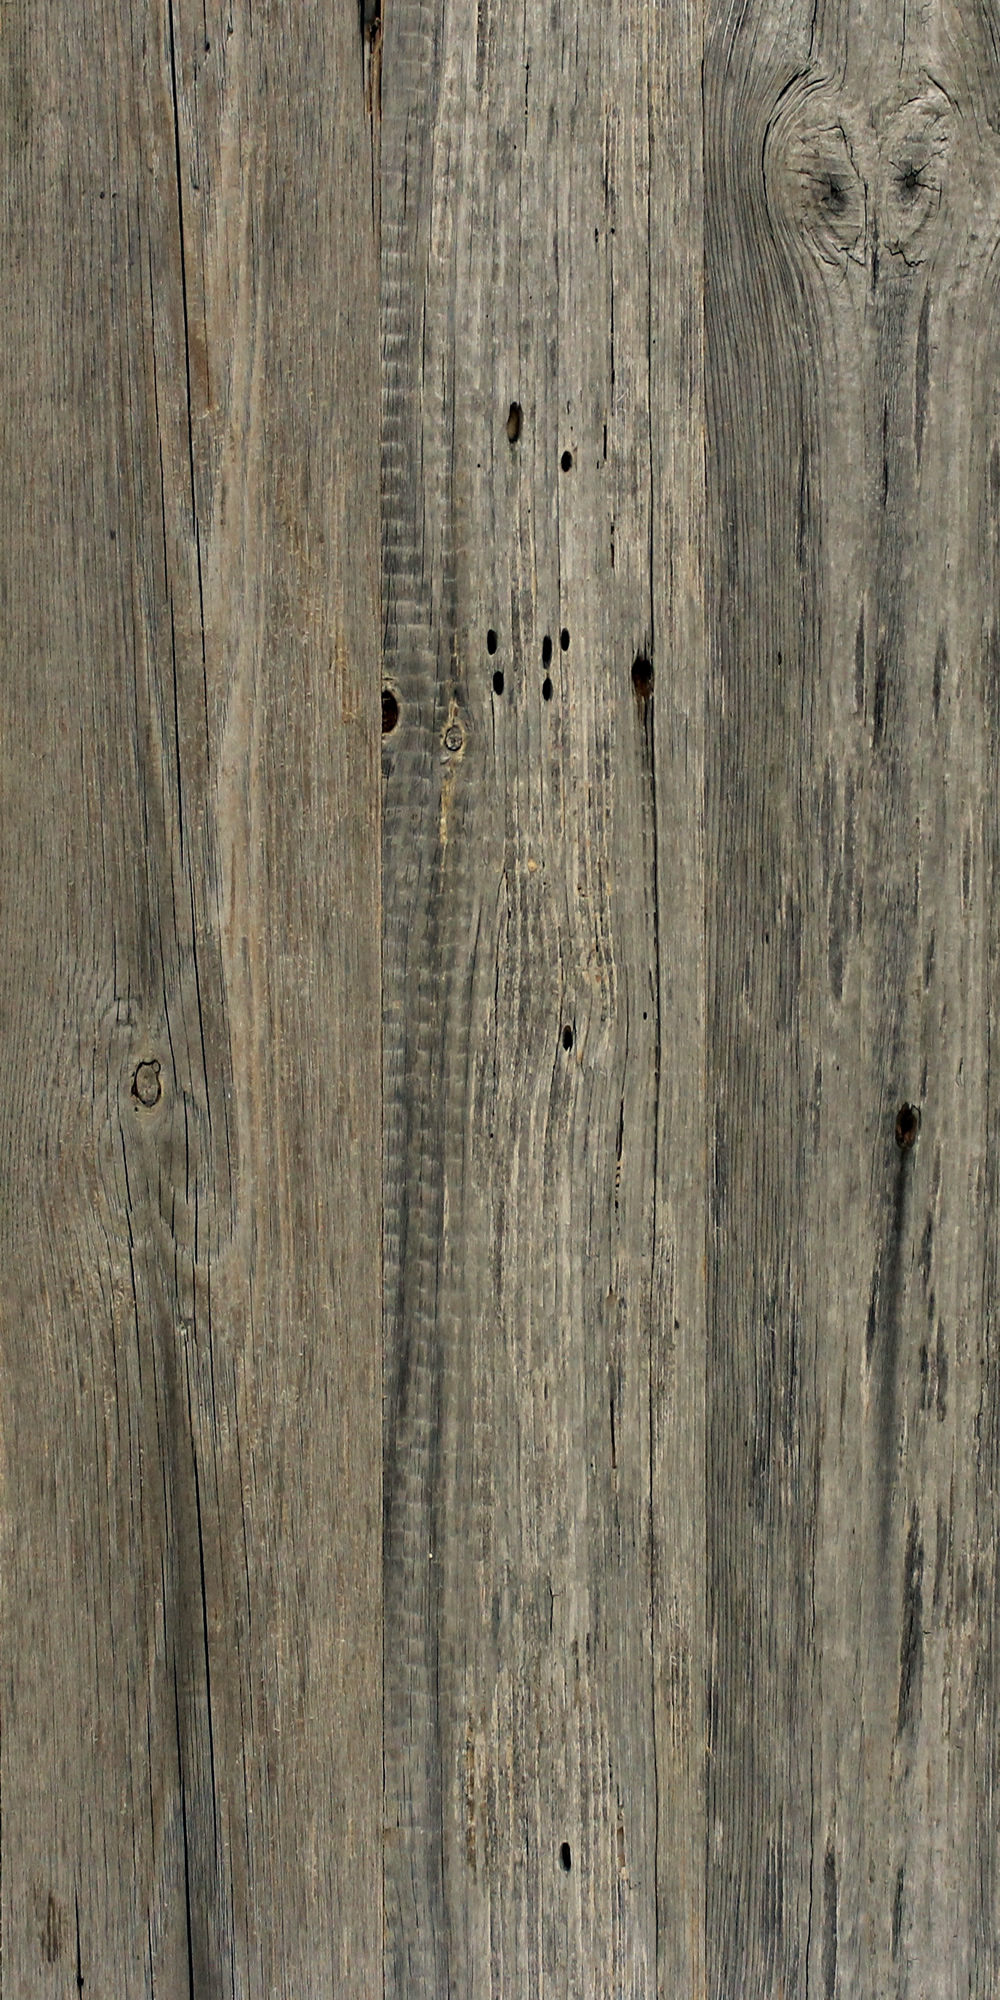 barnwood table, barn wood table, barn wood table top, reclaimed wood table